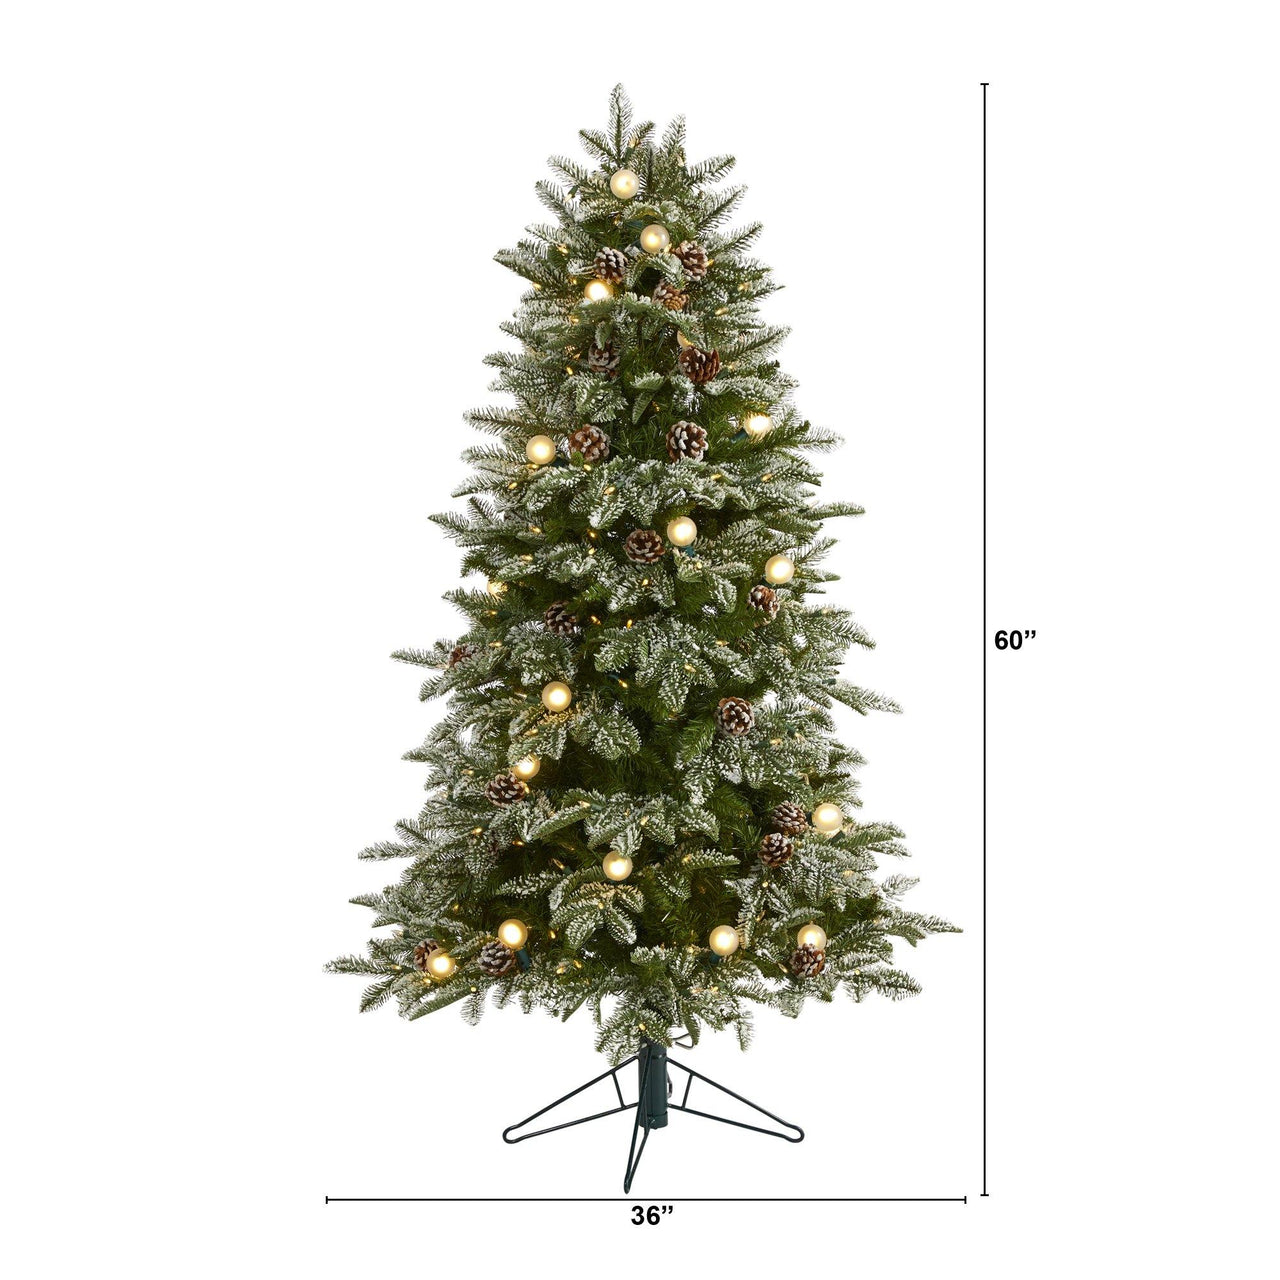 5' Flocked Whistler Mountain Fir Artificial Christmas Tree with 250 Warm White LED Lights with Instant Connect Technology, 28 Globe Bulbs, Pine Cones and 480 Bendable Branches - The Fox Decor